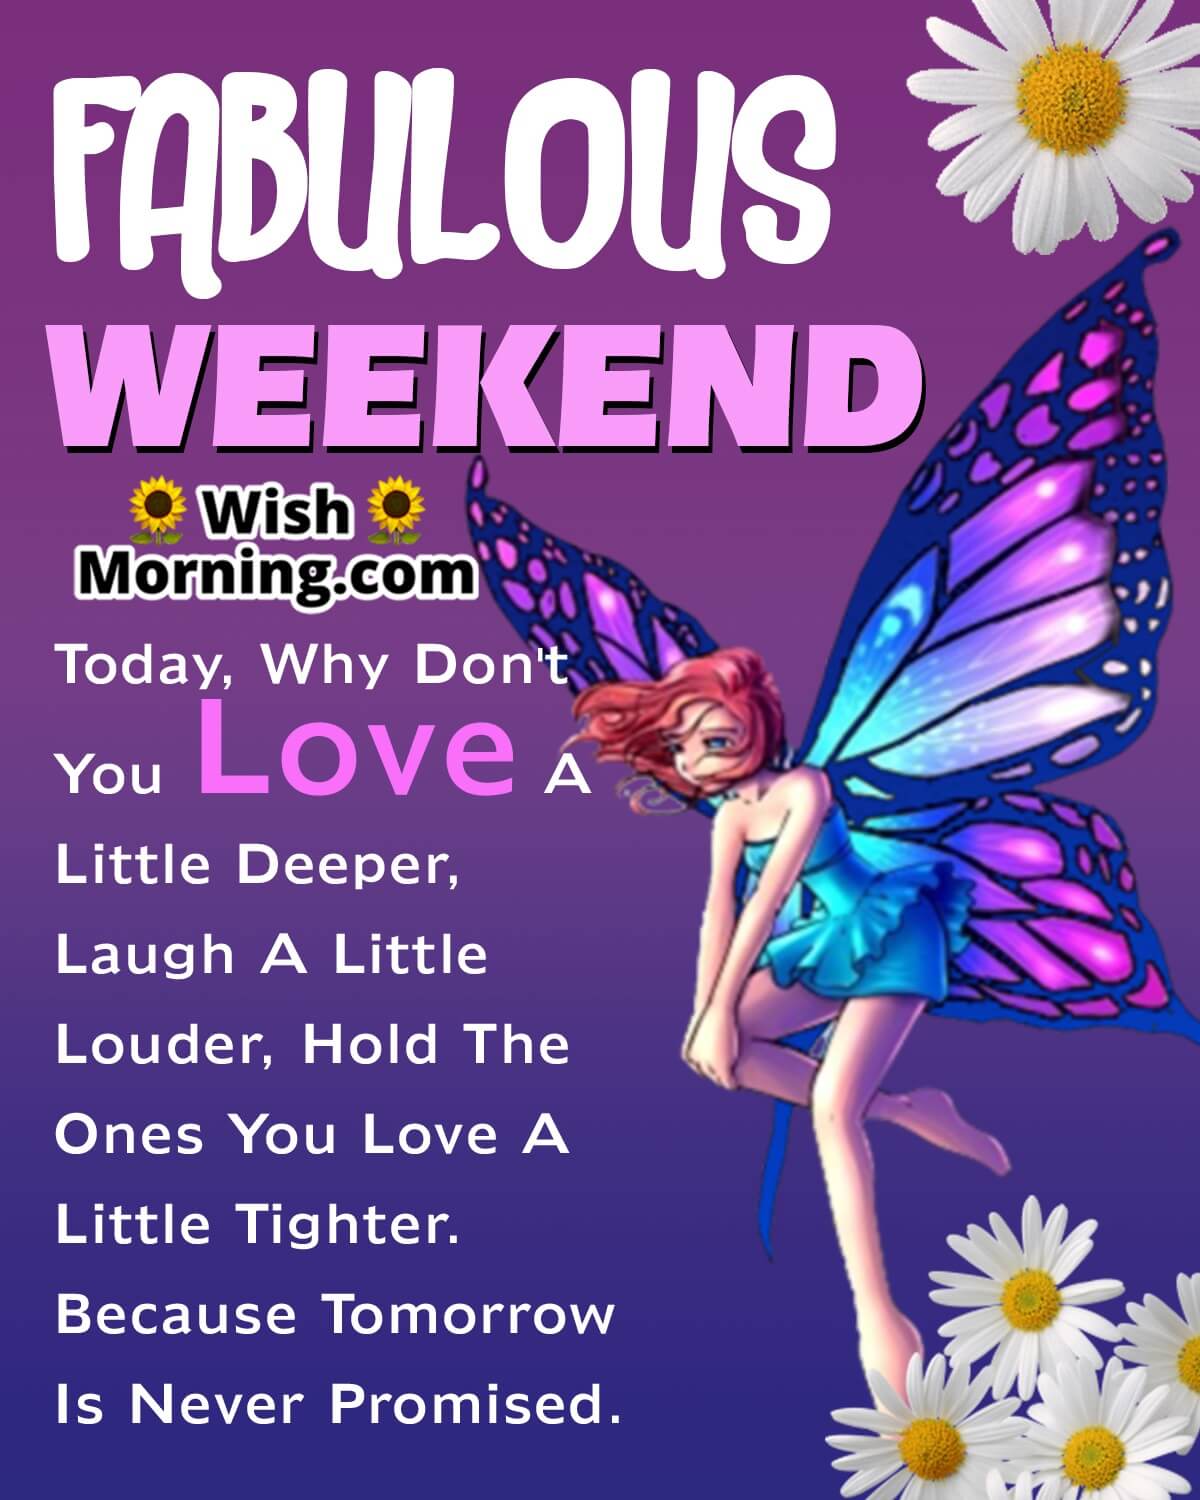 Fabulous Weekend Message Pic